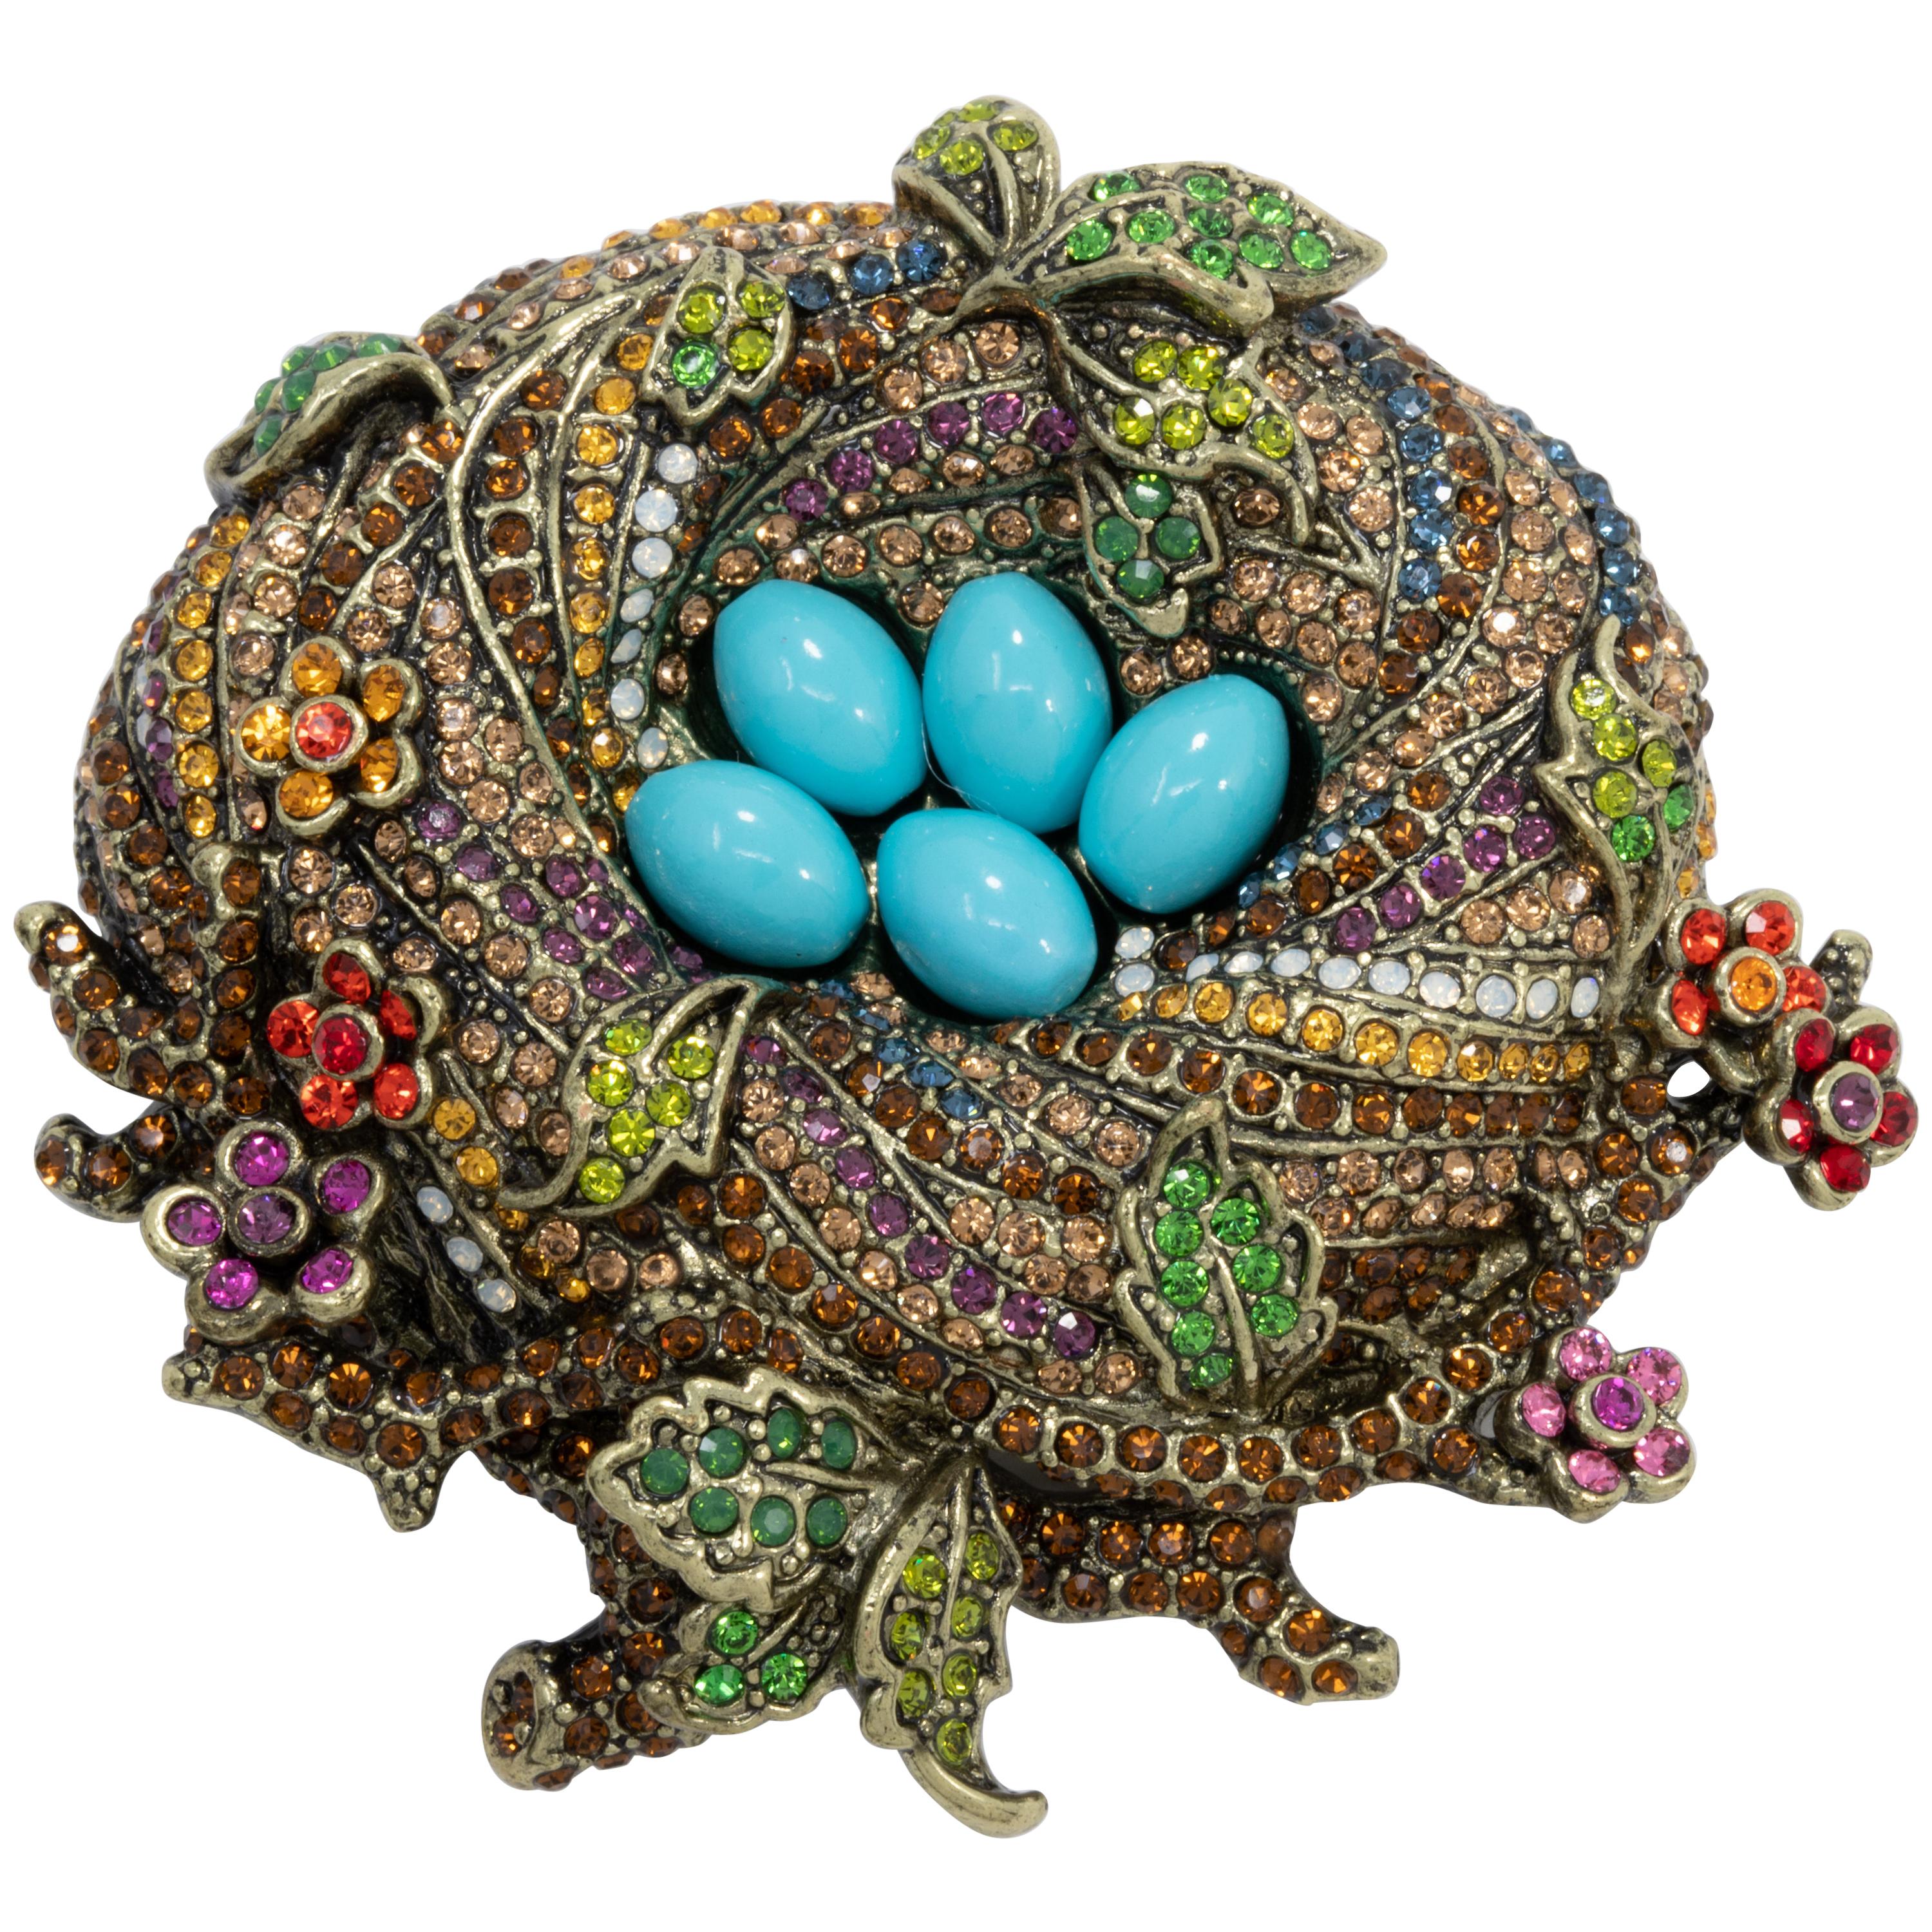 Heidi Daus "On a Lark" Bird's Nest Crystal Pin, Brass Tone, Turquoise Cabochons For Sale